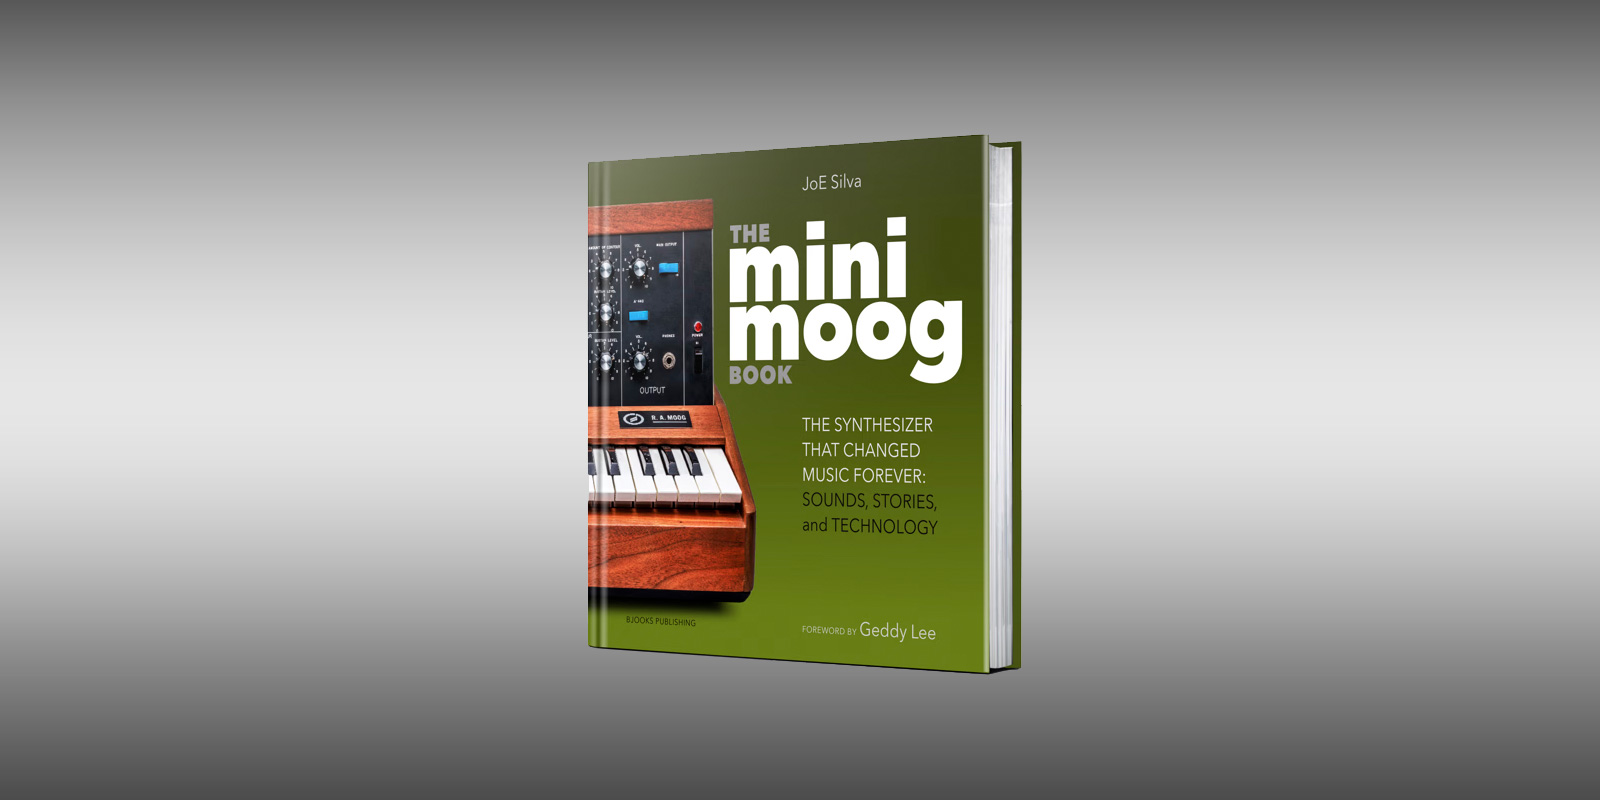 Now Available for Preorder: THE MINIMOOG BOOK Details 50+ Years of Electronic Music History